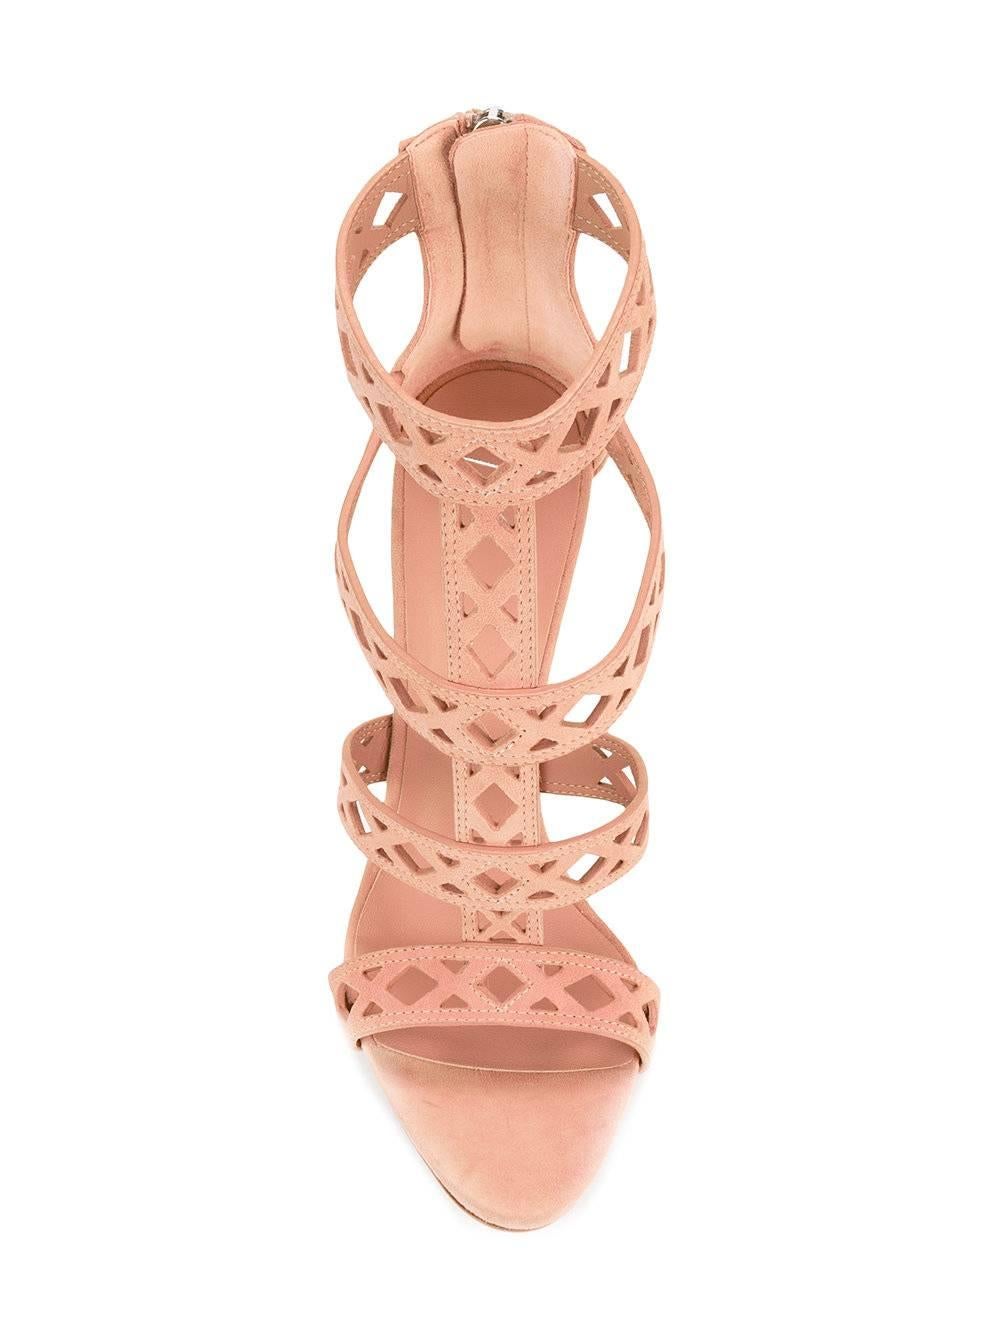 Giuseppe Zanotti New Blush Suede Cut Out Gladiator Sandals Heels in Box In New Condition In Chicago, IL